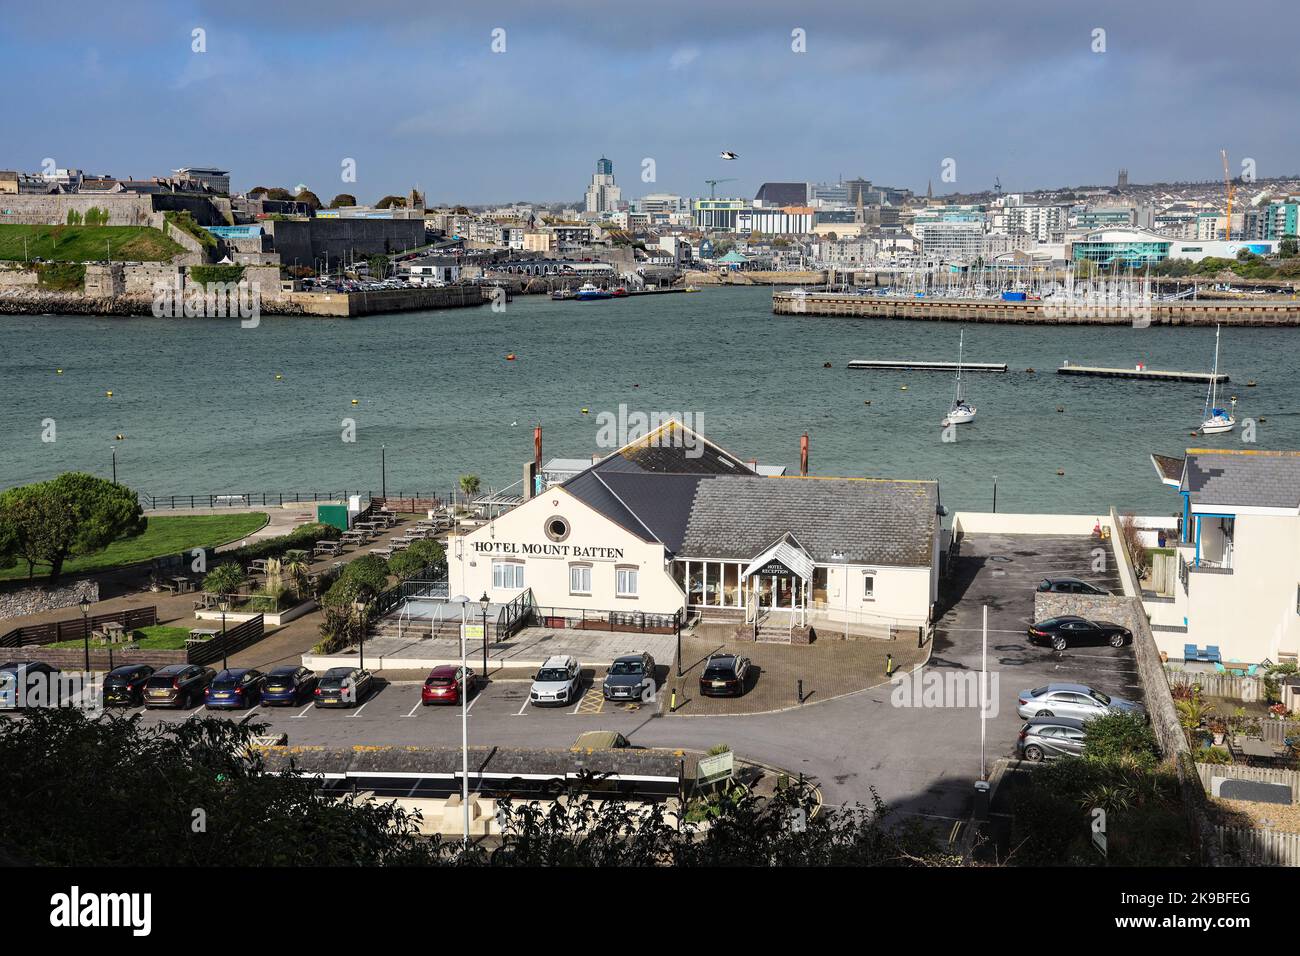 The Hotel Mount Batten and Carvery seen from a high vantage point with the Plymouth Barbican, Citadel and more forming the backdrop Stock Photo